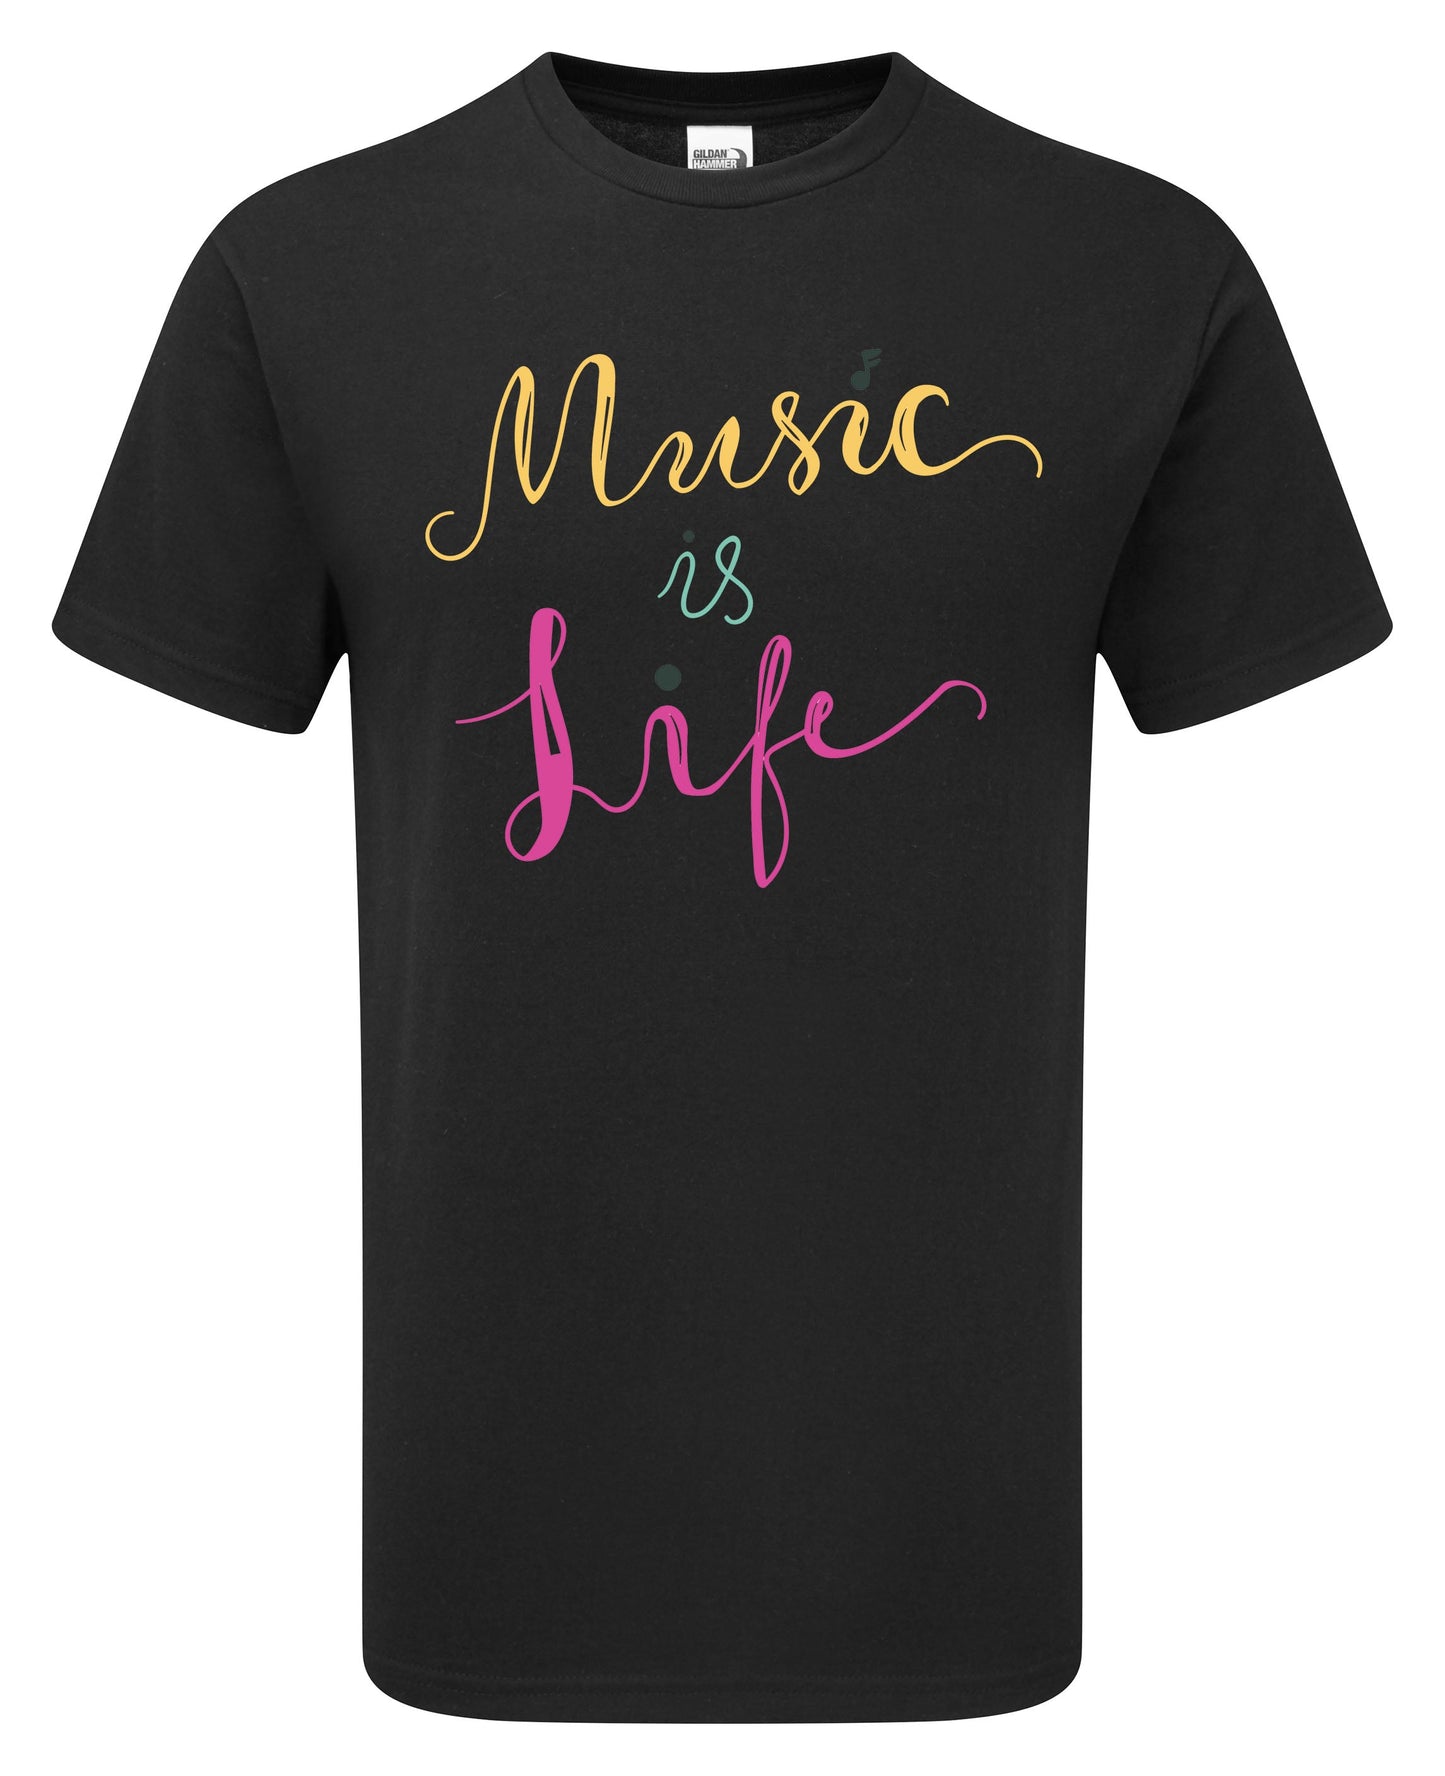 Music is Life T-Shirt